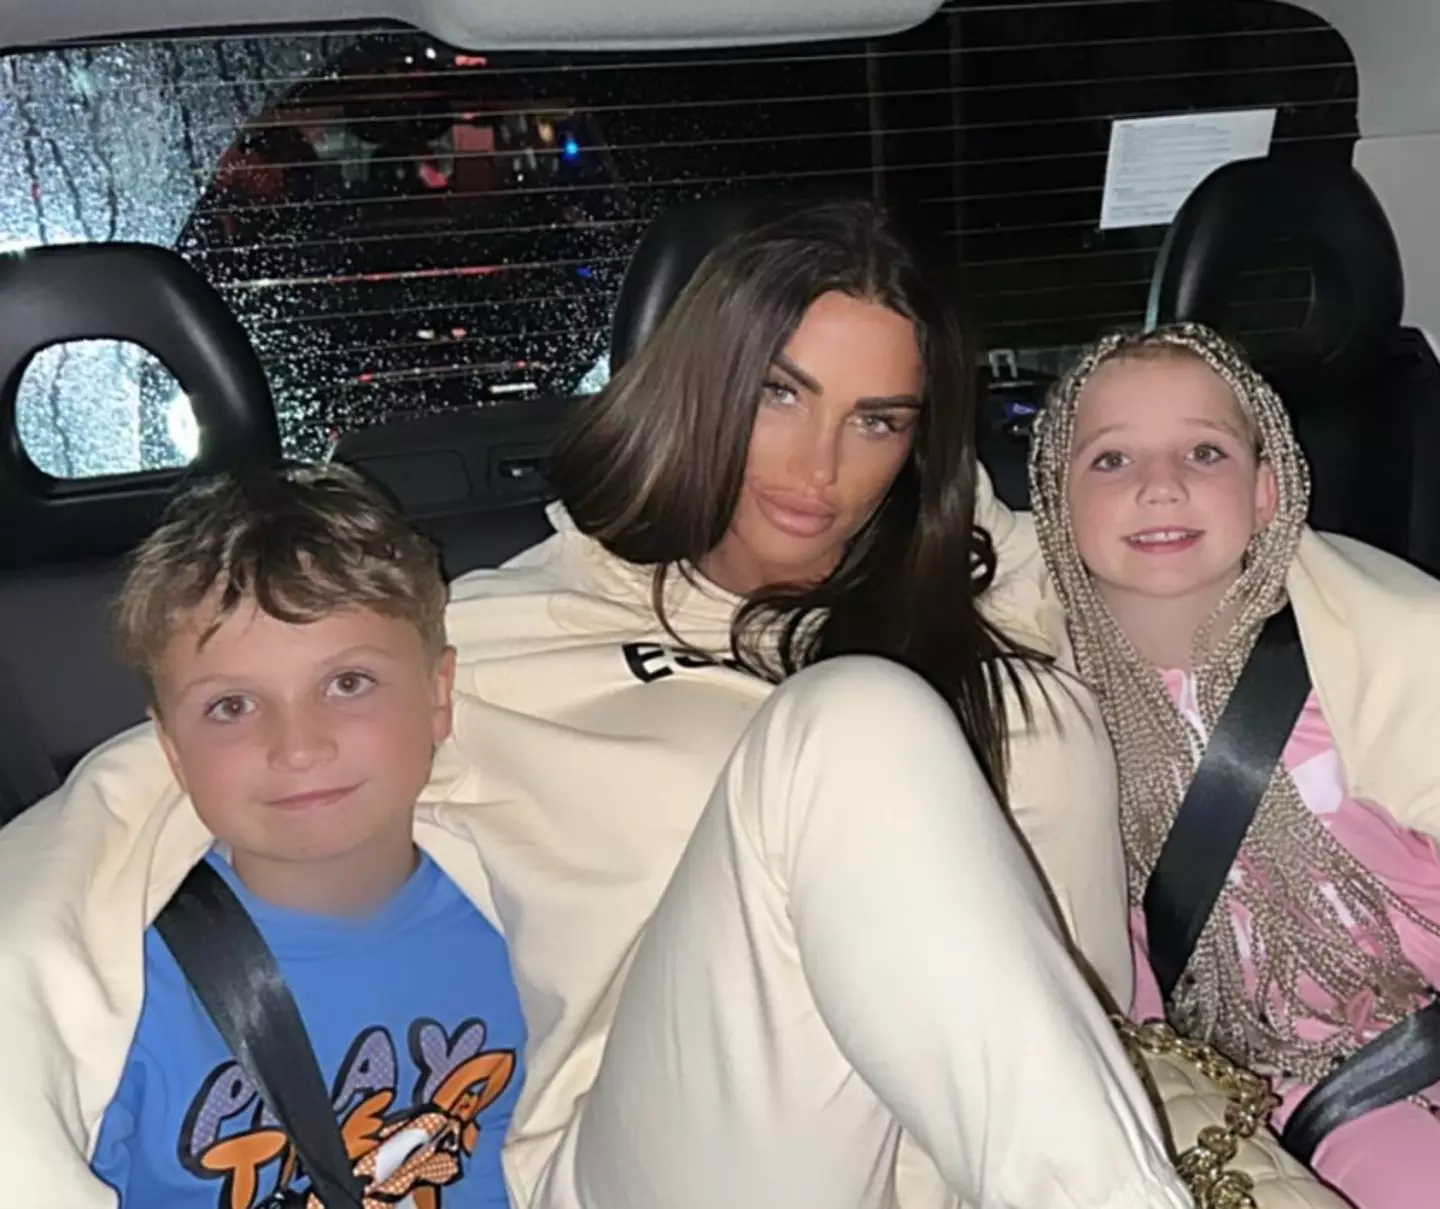 Katie Price has taken to Instagram in an emotional post about her youngest children growing up.